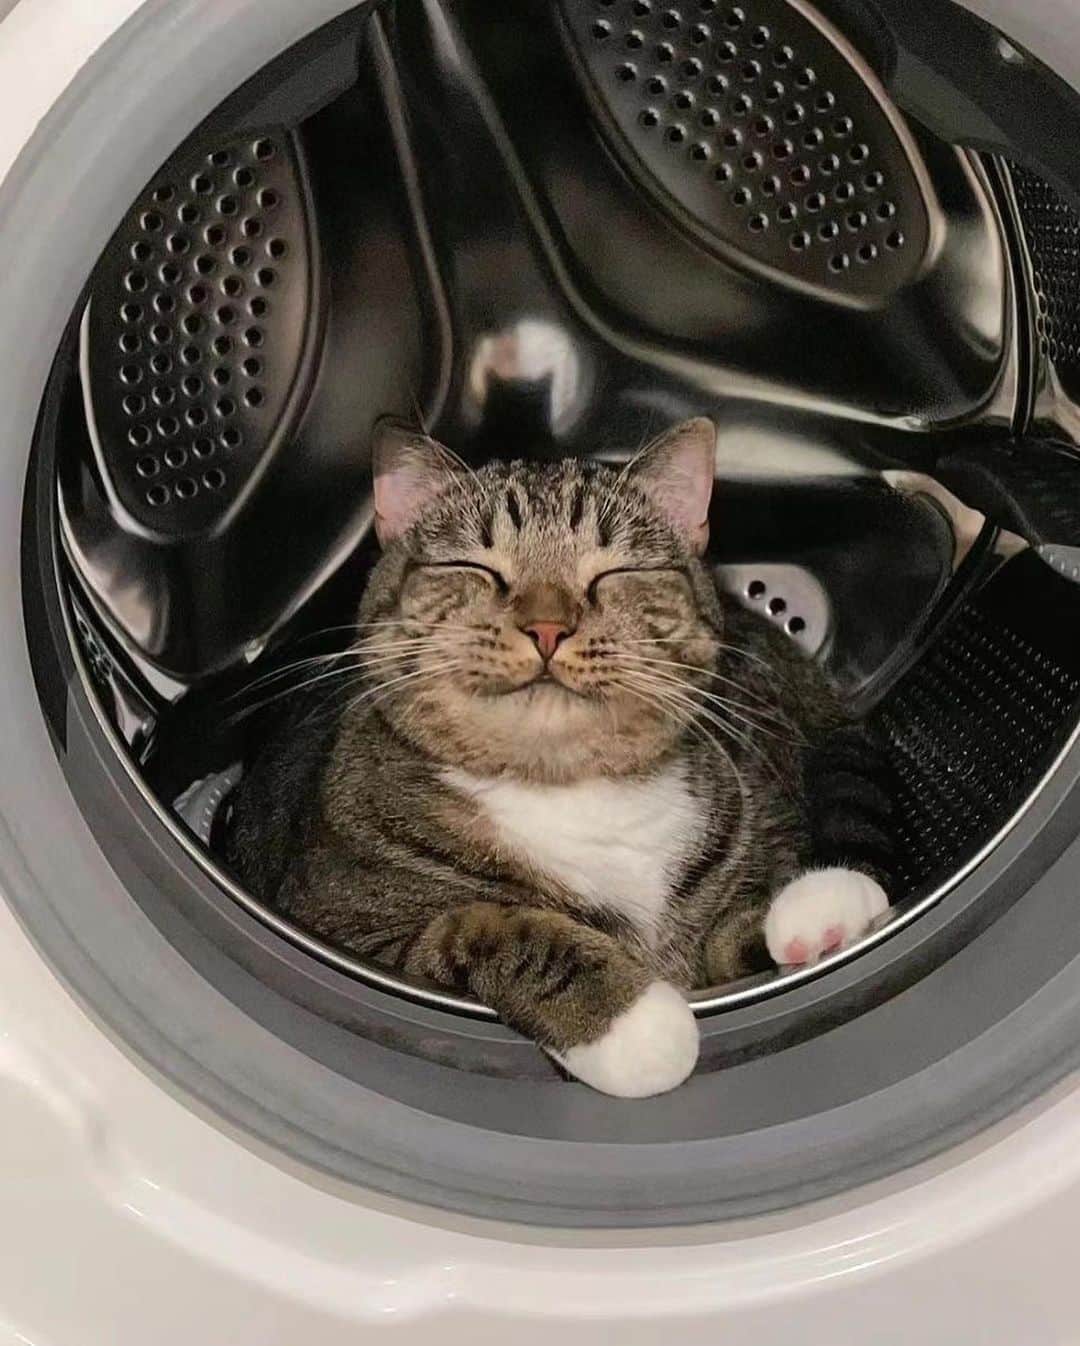 Cute Pets Dogs Catsのインスタグラム：「So dangerous, if you forget him inside of it  Credit: adorable @云猫猫饼饼呀 | DY ** For all crediting issues and removals pls 𝐄𝐦𝐚𝐢𝐥 𝐮𝐬 ☺️  𝐍𝐨𝐭𝐞: we don’t own this video/pics, all rights go to their respective owners. If owner is not provided, tagged (meaning we couldn’t find who is the owner), 𝐩𝐥𝐬 𝐄𝐦𝐚𝐢𝐥 𝐮𝐬 with 𝐬𝐮𝐛𝐣𝐞𝐜𝐭 “𝐂𝐫𝐞𝐝𝐢𝐭 𝐈𝐬𝐬𝐮𝐞𝐬” and 𝐨𝐰𝐧𝐞𝐫 𝐰𝐢𝐥𝐥 𝐛𝐞 𝐭𝐚𝐠𝐠𝐞𝐝 𝐬𝐡𝐨𝐫𝐭𝐥𝐲 𝐚𝐟𝐭𝐞𝐫.  We have been building this community for over 6 years, but 𝐞𝐯𝐞𝐫𝐲 𝐫𝐞𝐩𝐨𝐫𝐭 𝐜𝐨𝐮𝐥𝐝 𝐠𝐞𝐭 𝐨𝐮𝐫 𝐩𝐚𝐠𝐞 𝐝𝐞𝐥𝐞𝐭𝐞𝐝, pls email us first. **」